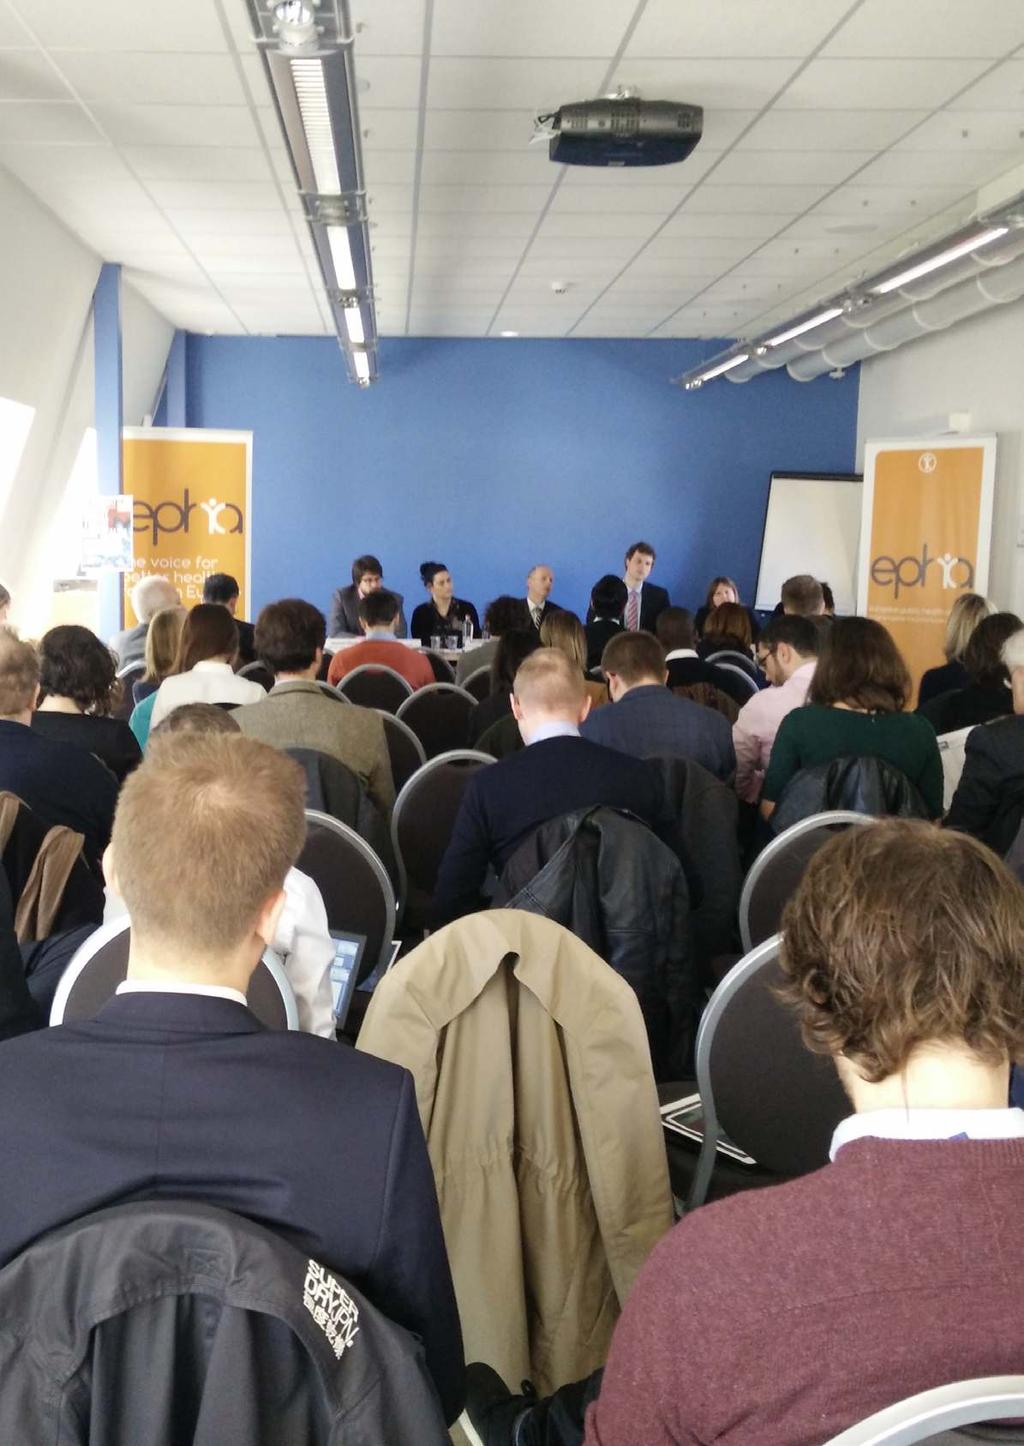 Setting the scene The European Public Health Alliance (EPHA), in partnership with Manchester University and the Economic & Social Research Council co-hosted a public debate on Brexit, Trade and